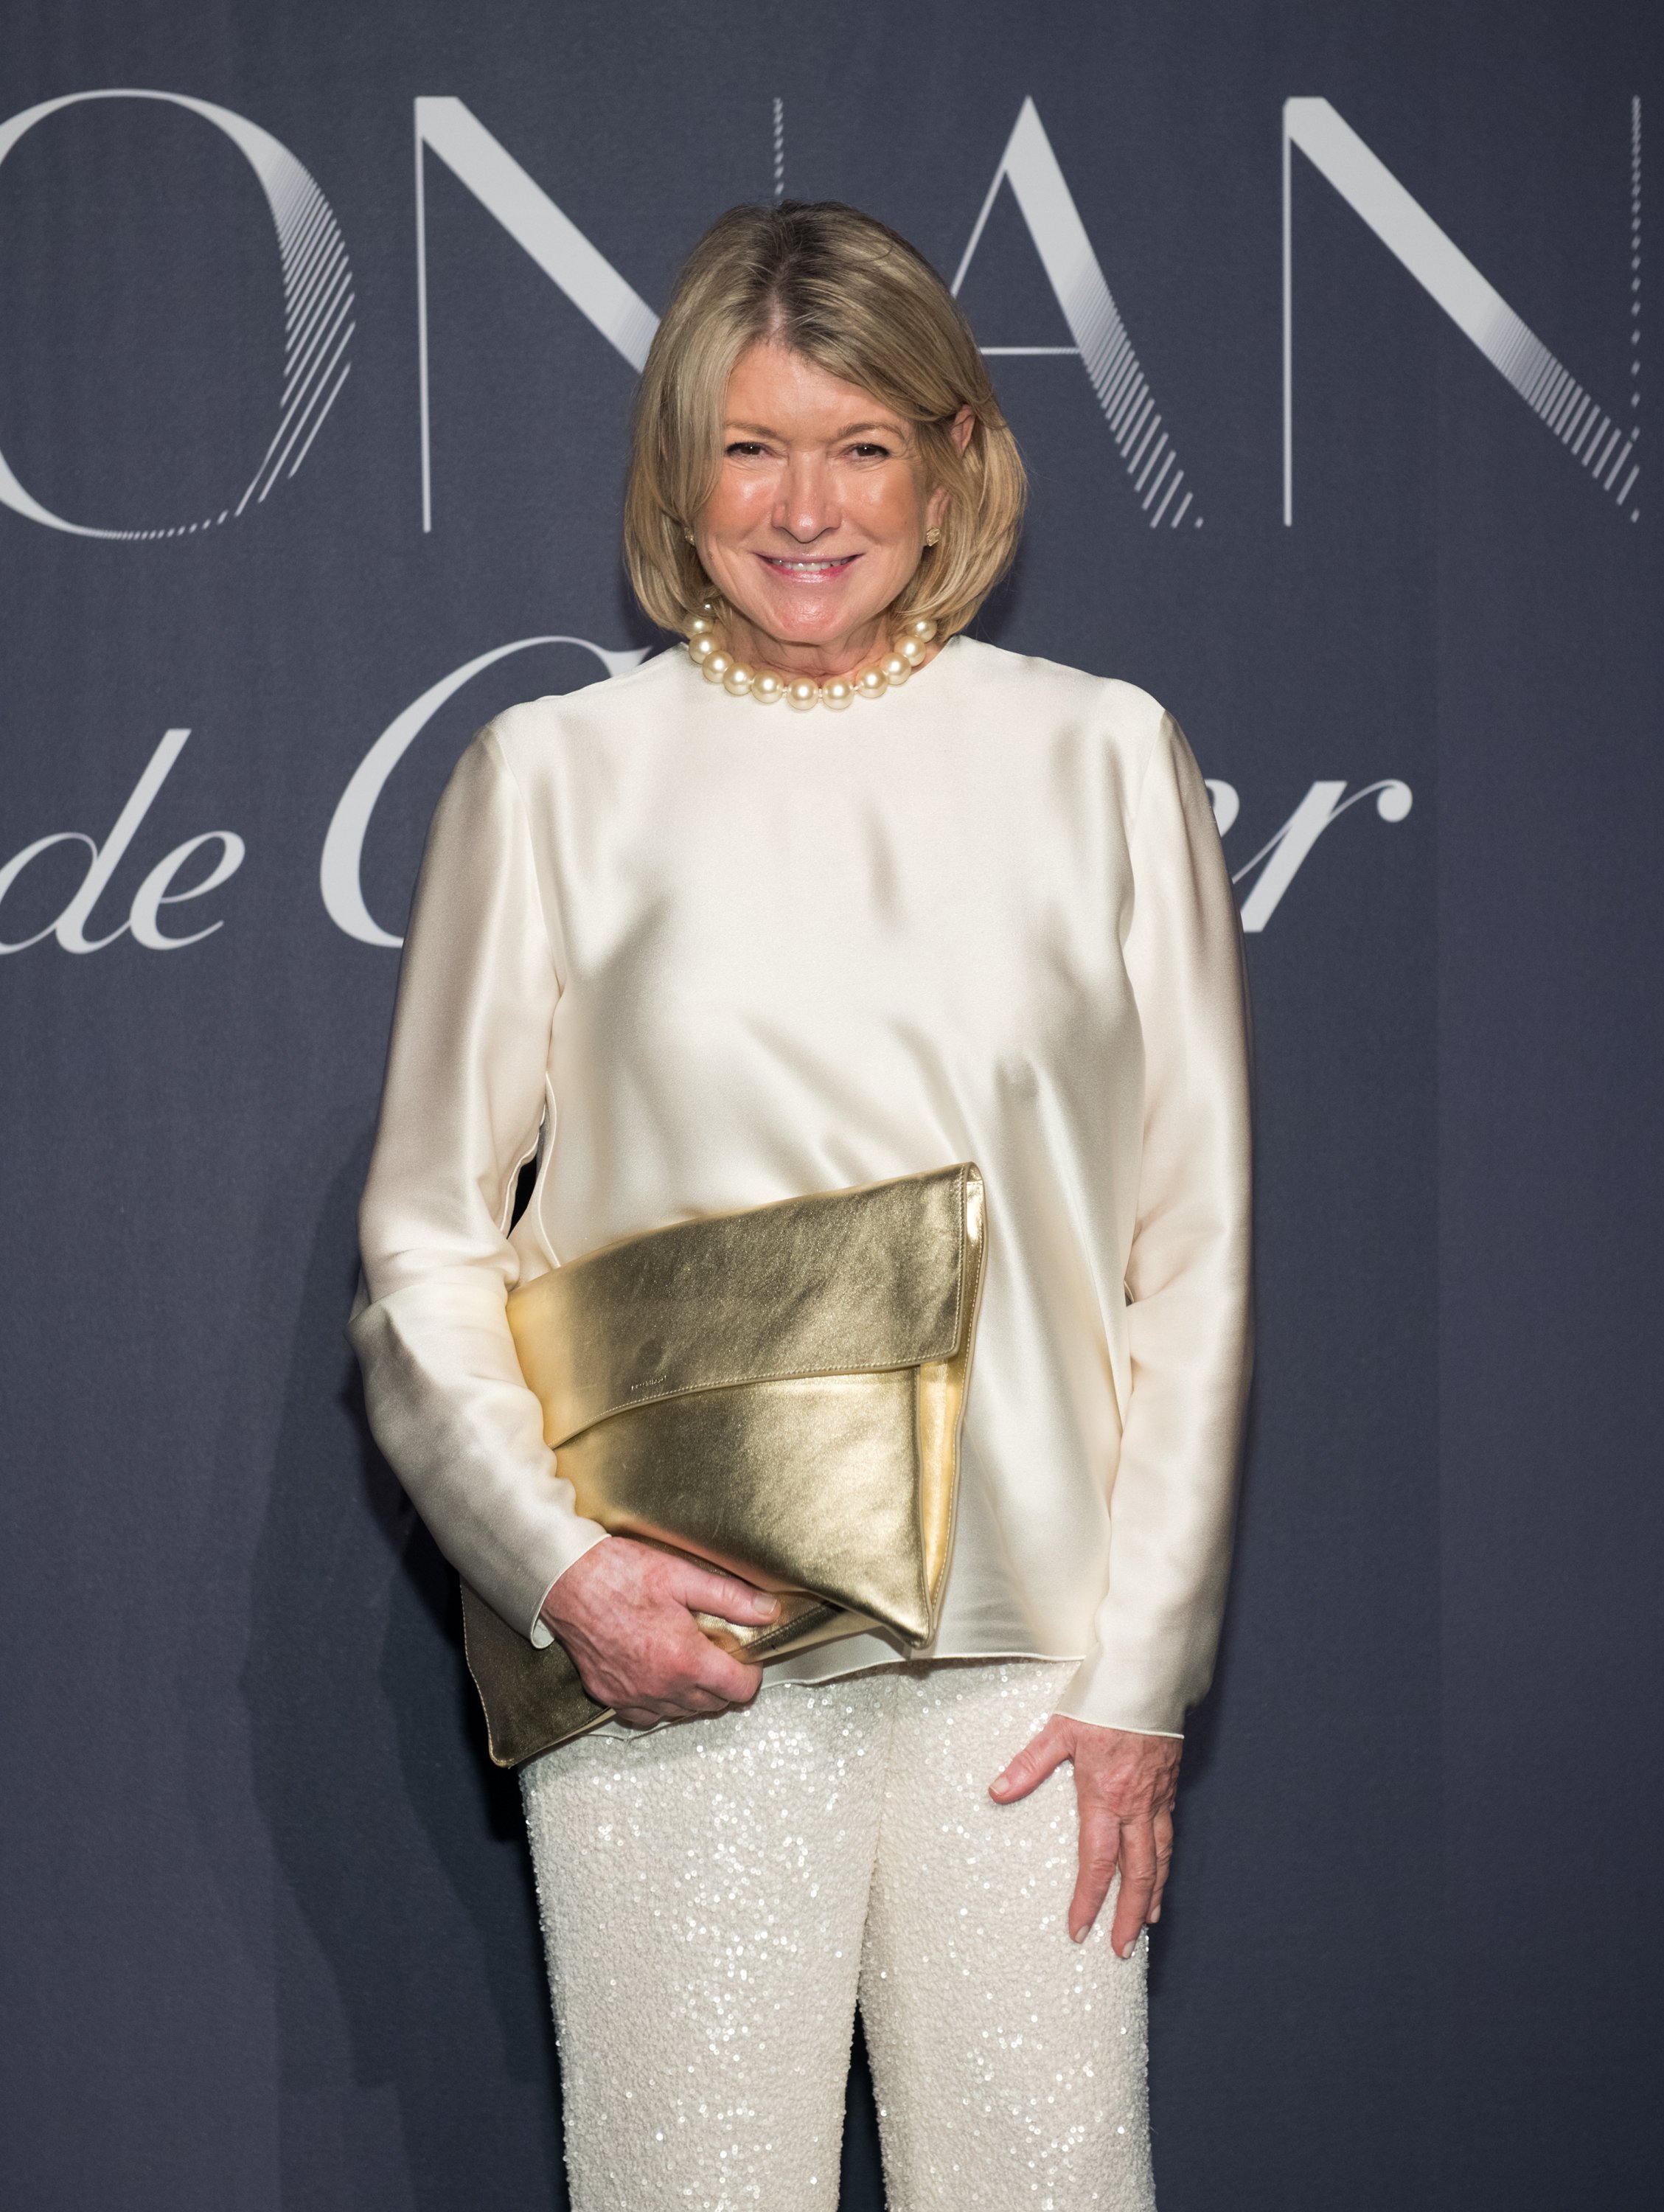  Martha Stewart attends Cartier's celebration of Resonances de Cartier on October 10, 2017, in New York City | Source: Getty Images